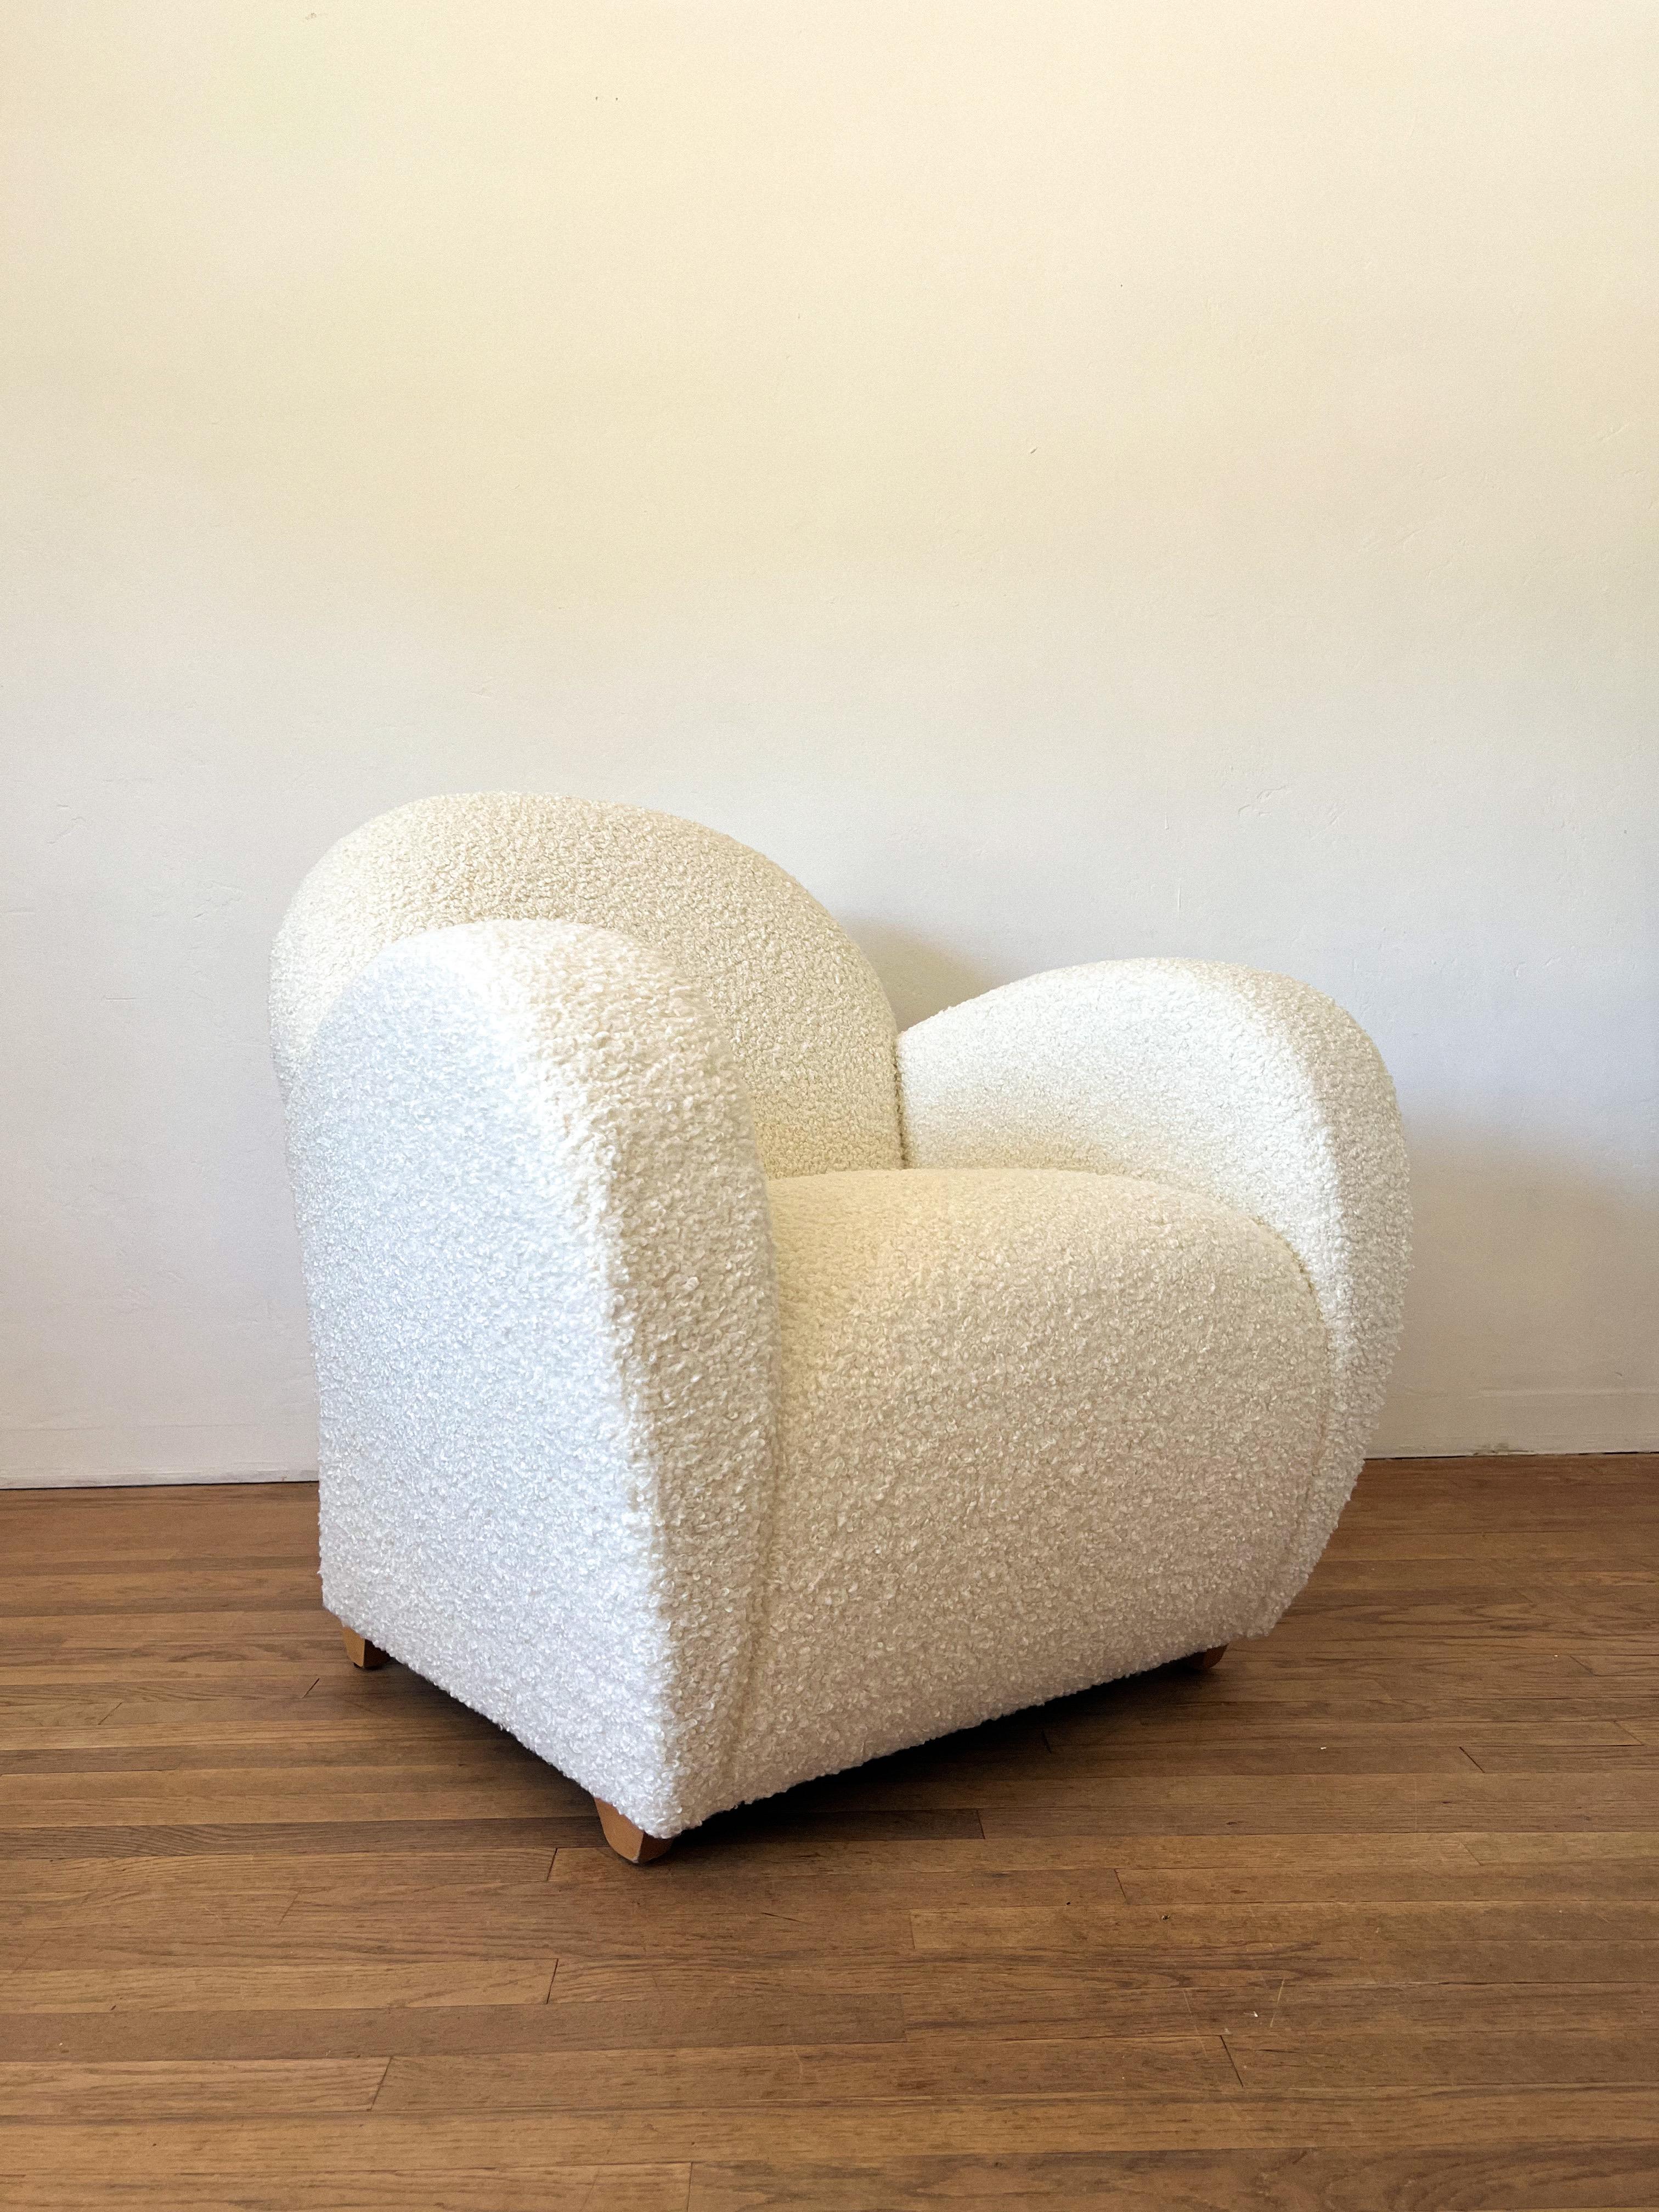 1980s Postmodern Lounge Chair by Loewenstein In Good Condition For Sale In La Mesa, CA